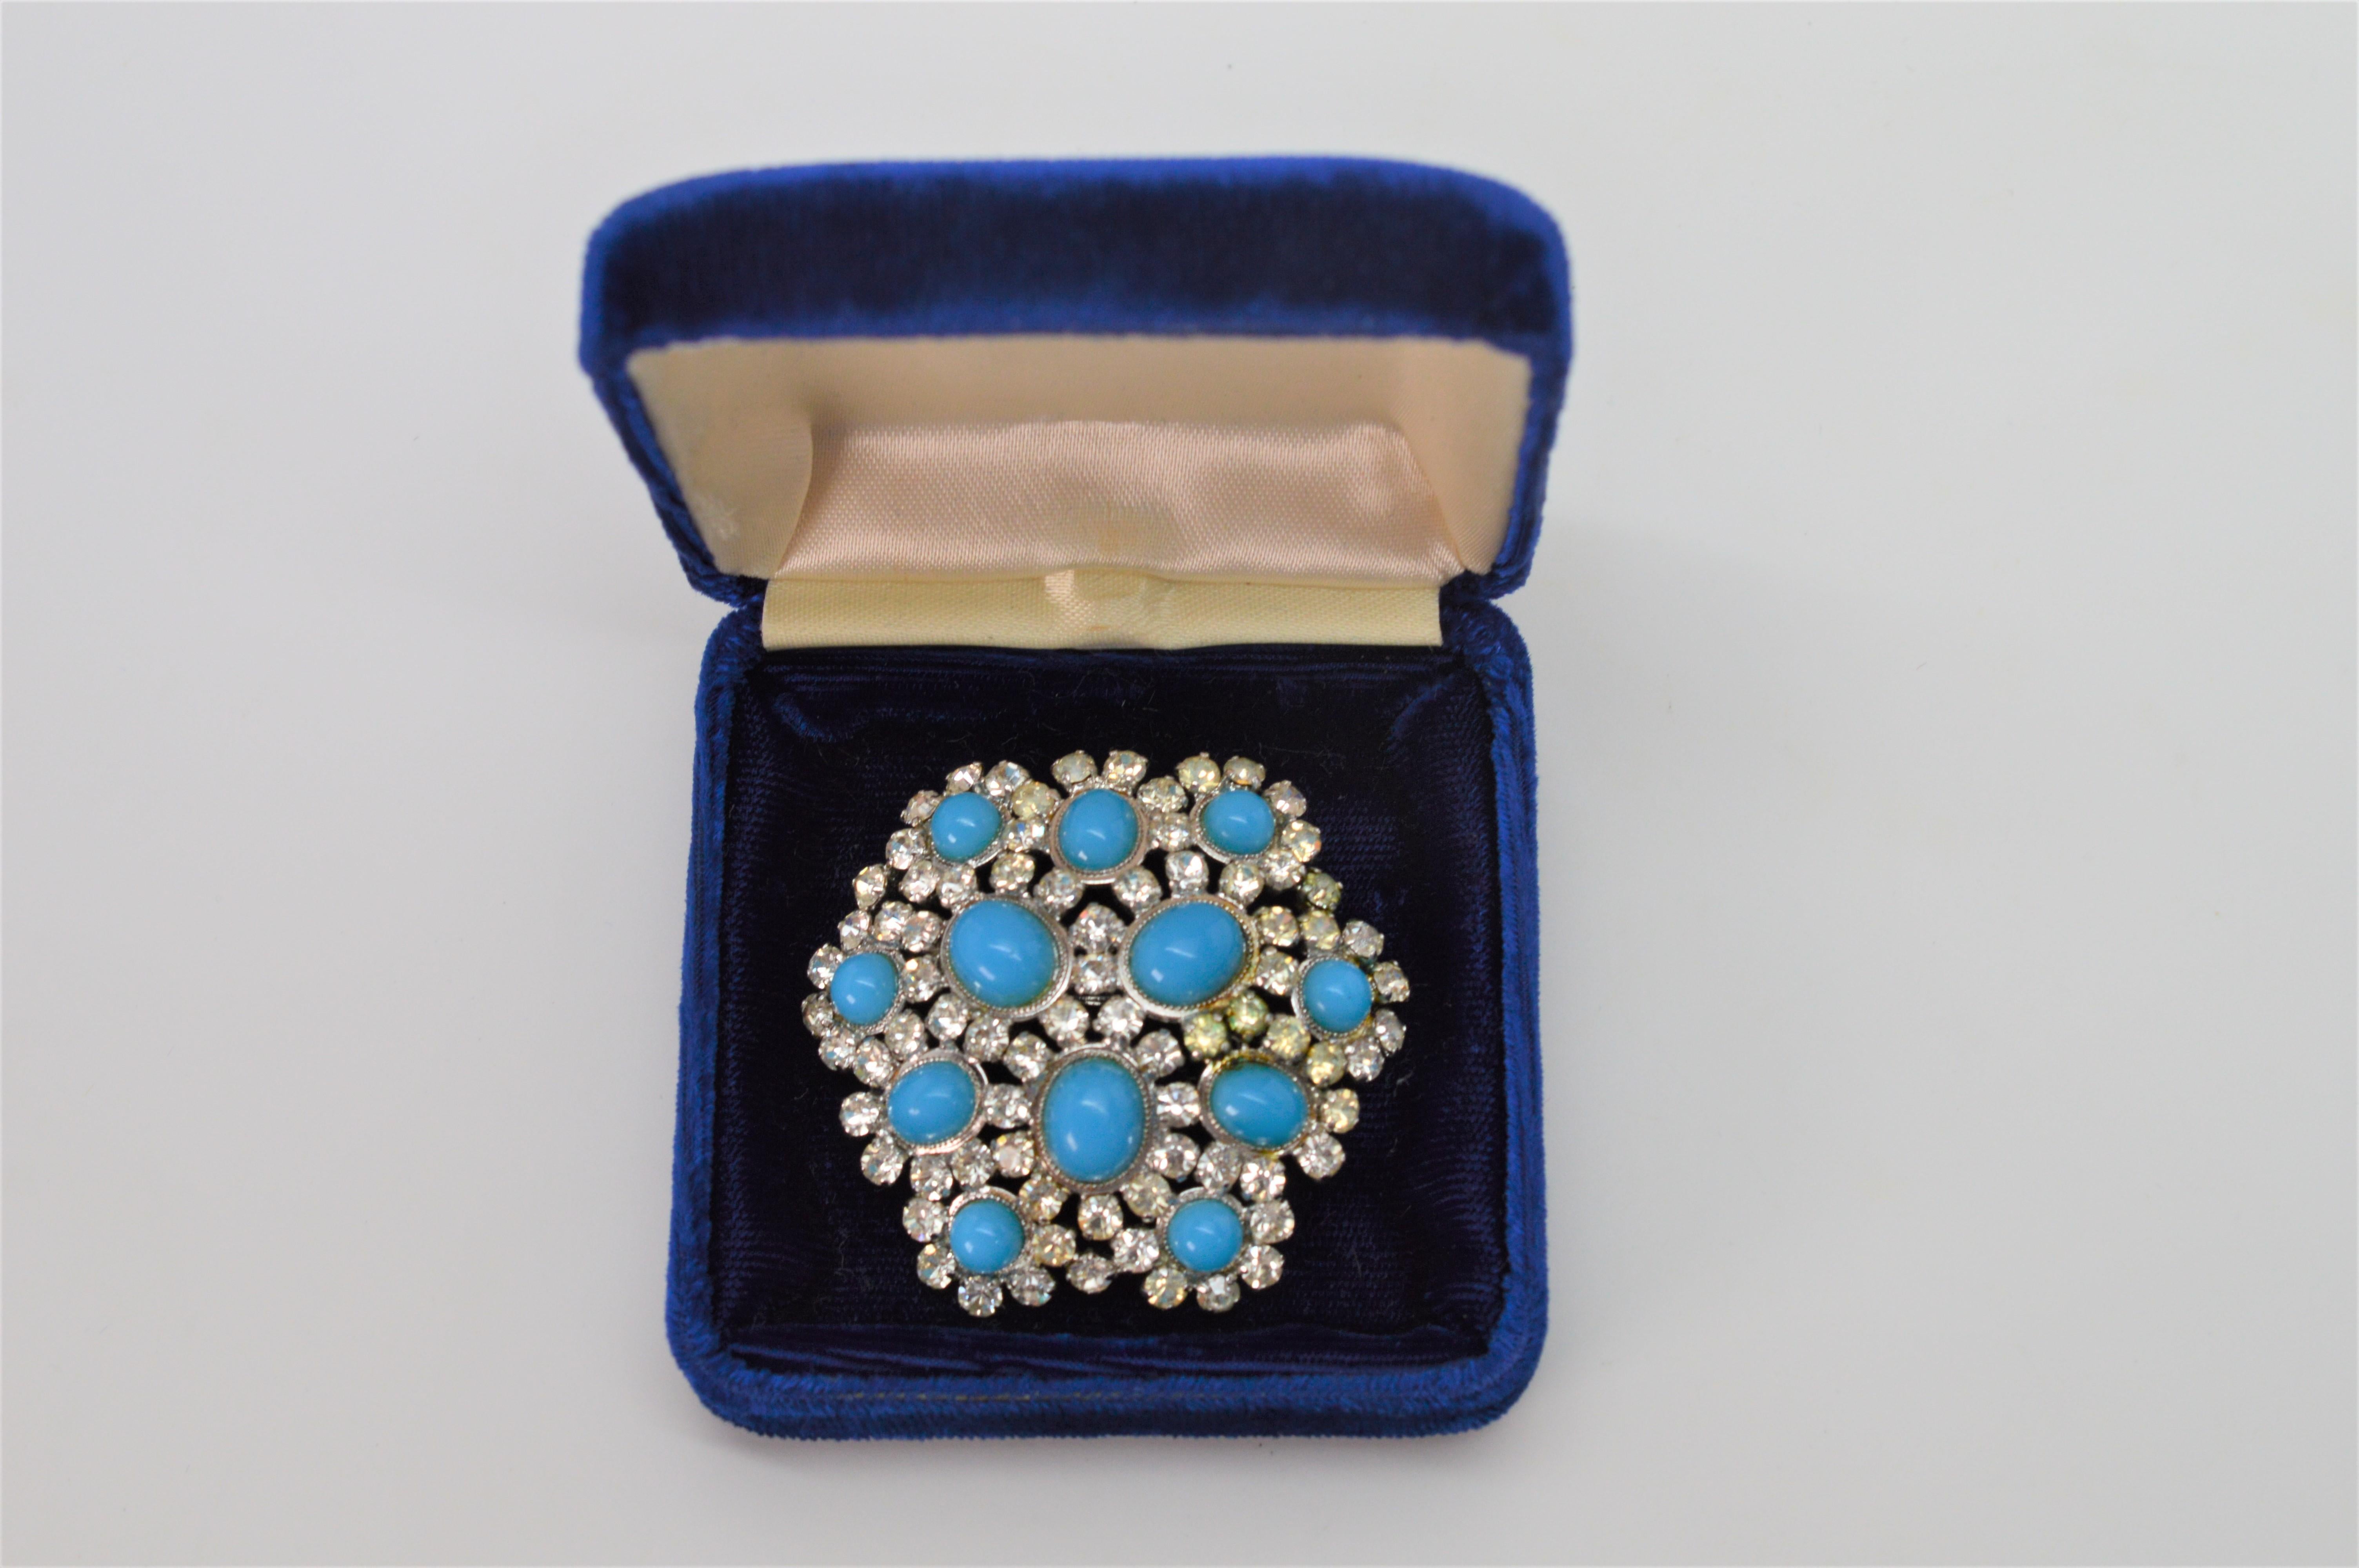 Spectacular Vintage Christian Dior Costume Turquoise and Rhinestone Floral Burst Brooch. Made in Germany 1968, this brilliant, highly collectible brooch sparkles with multiple flashy rhinestones surrounding a dozen blue turquoise cabochons. The